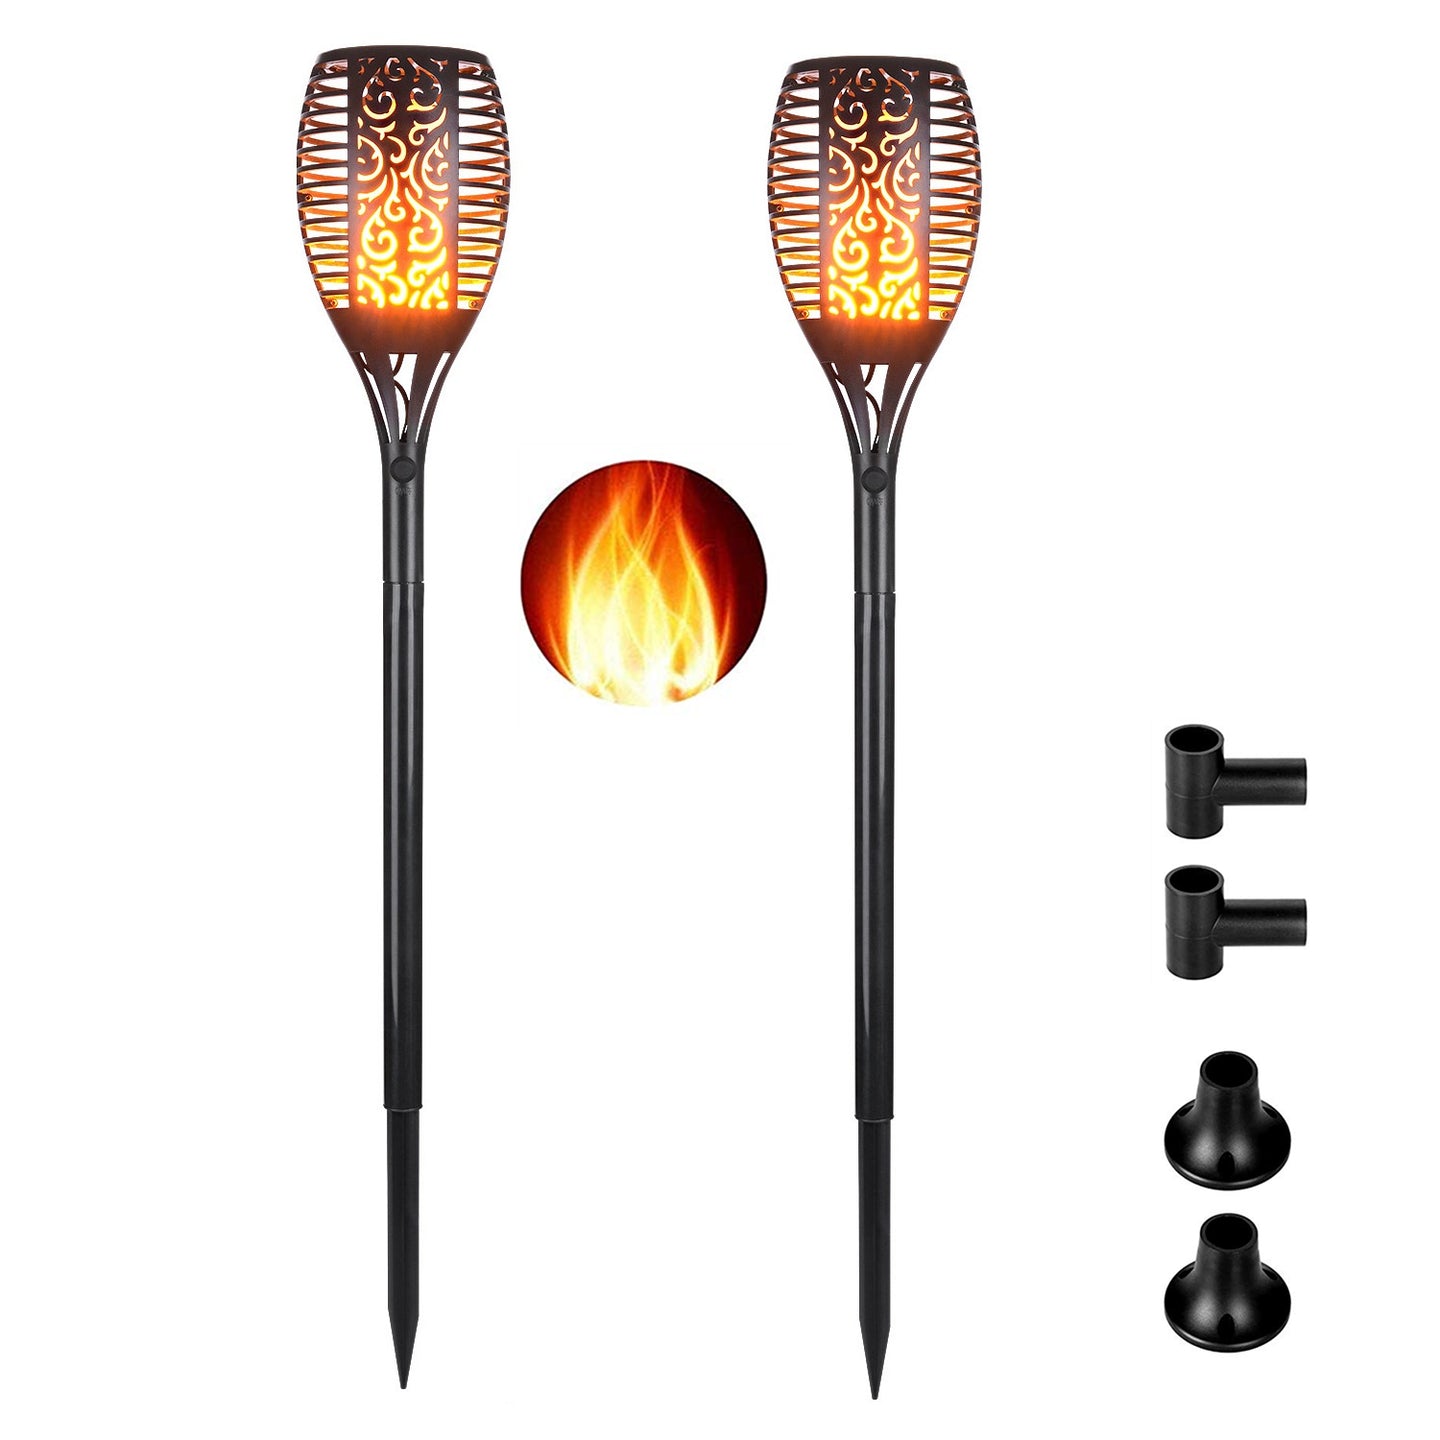 Solar Torch Lights, IMAGE LED Solar Path Light with Flickering Flame, Solar Tiki Torches, Waterproof Wireless Outdoor Halloween Christmas Garden Decorations Landscape Pathway Lighting with Auto On/Off